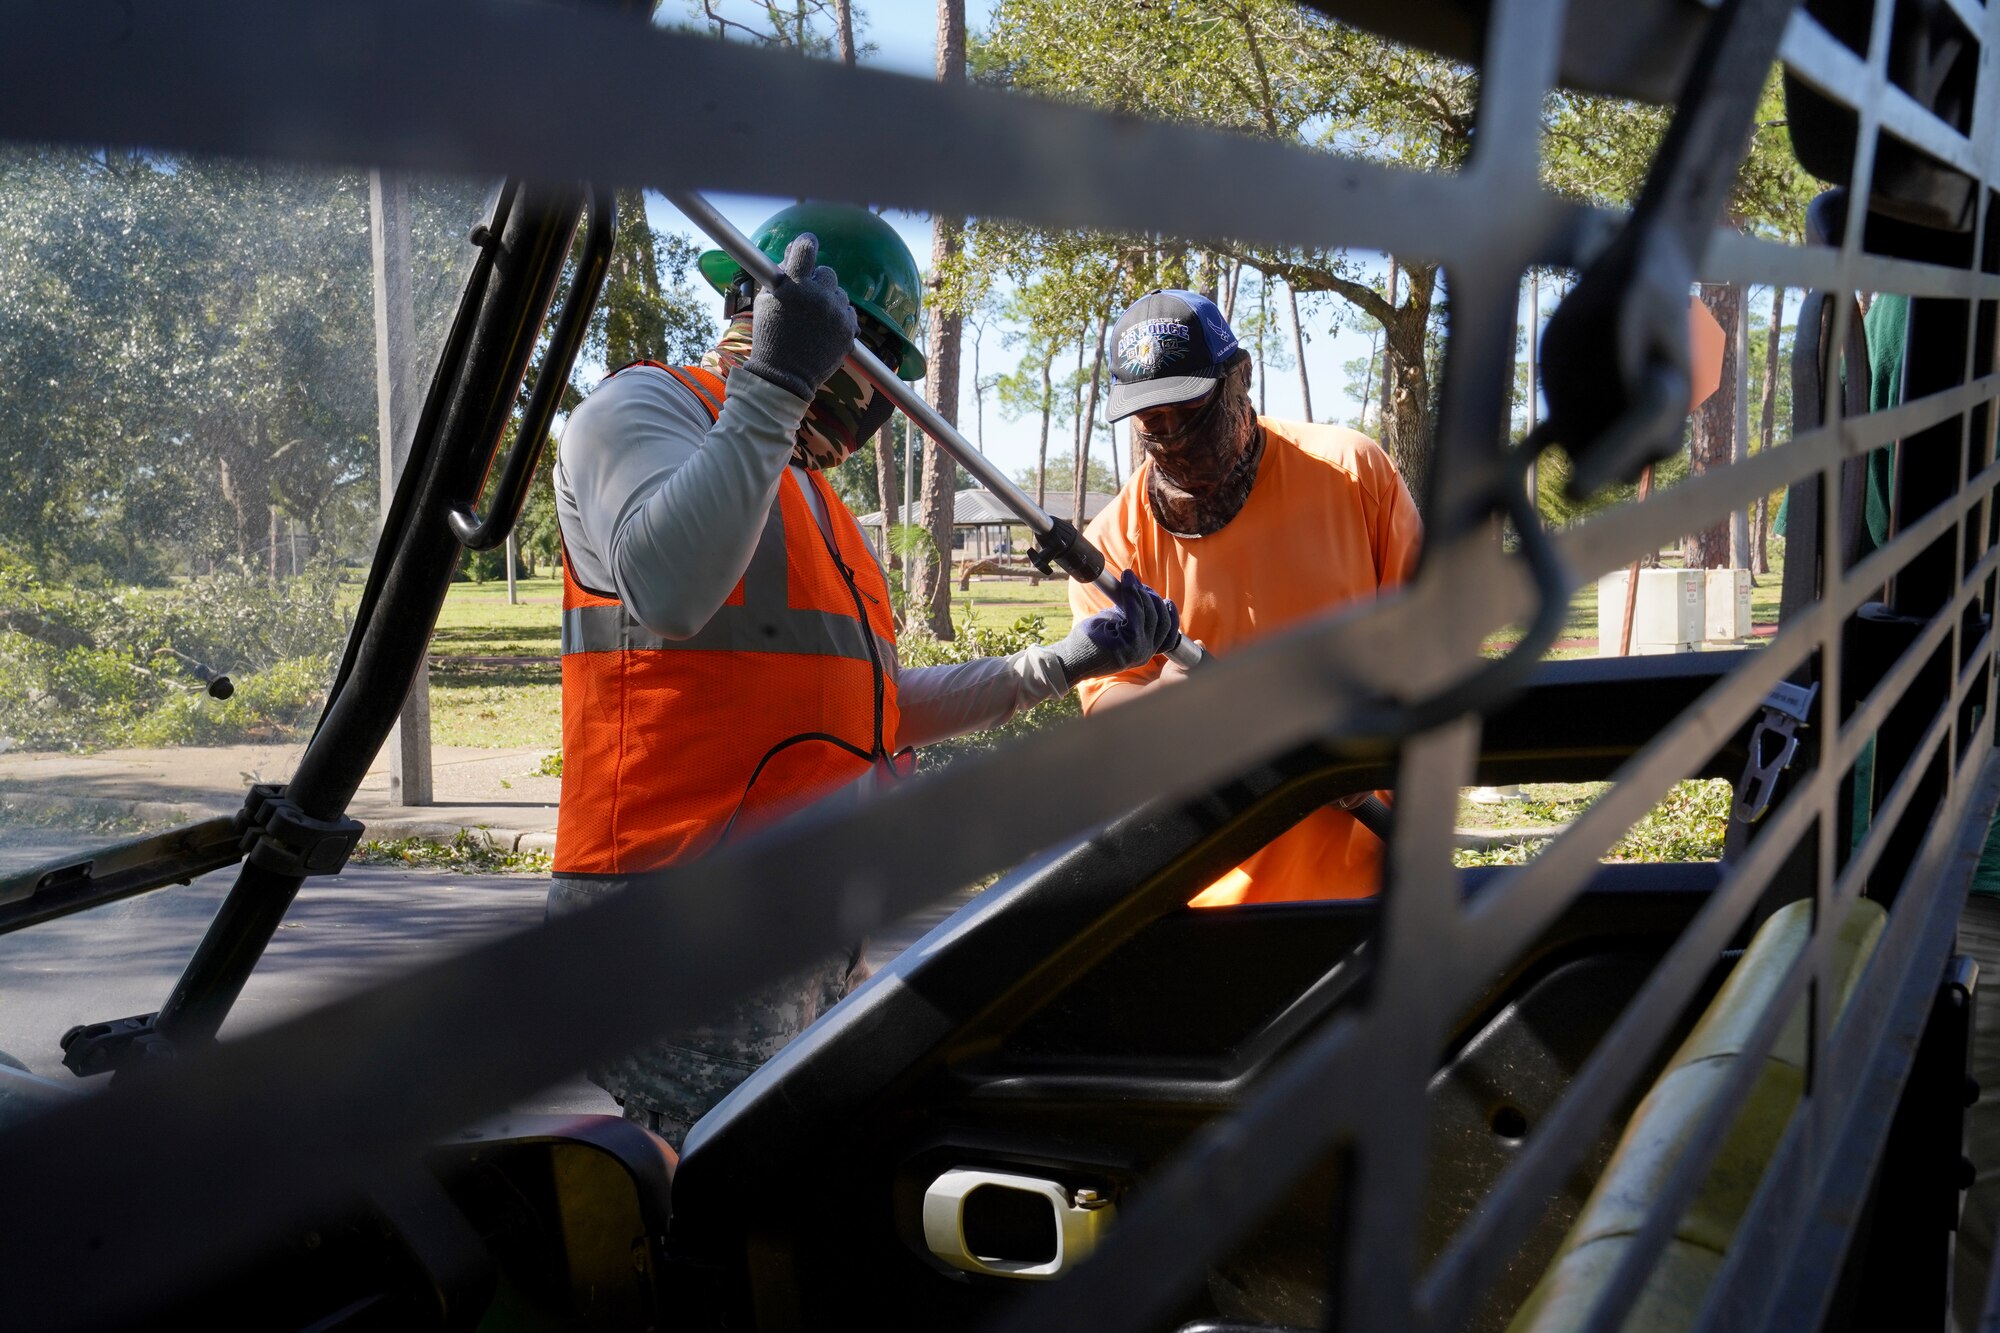 Franchot Canaan and Adan Cardoza, Vectrus ground landscaping maintainers, prepare equipment to clean up debris at Keesler Air Force Base, Mississippi, Oct. 29, 2020. Members of the 81st Civil Engineering Squadron and Vectrus worked before, during and after Hurricane Zeta to ensure the base infrastructure was able to sustain the wind and rain during the storm. (U.S. Air Force photo by Airman 1st Class Seth Haddix)